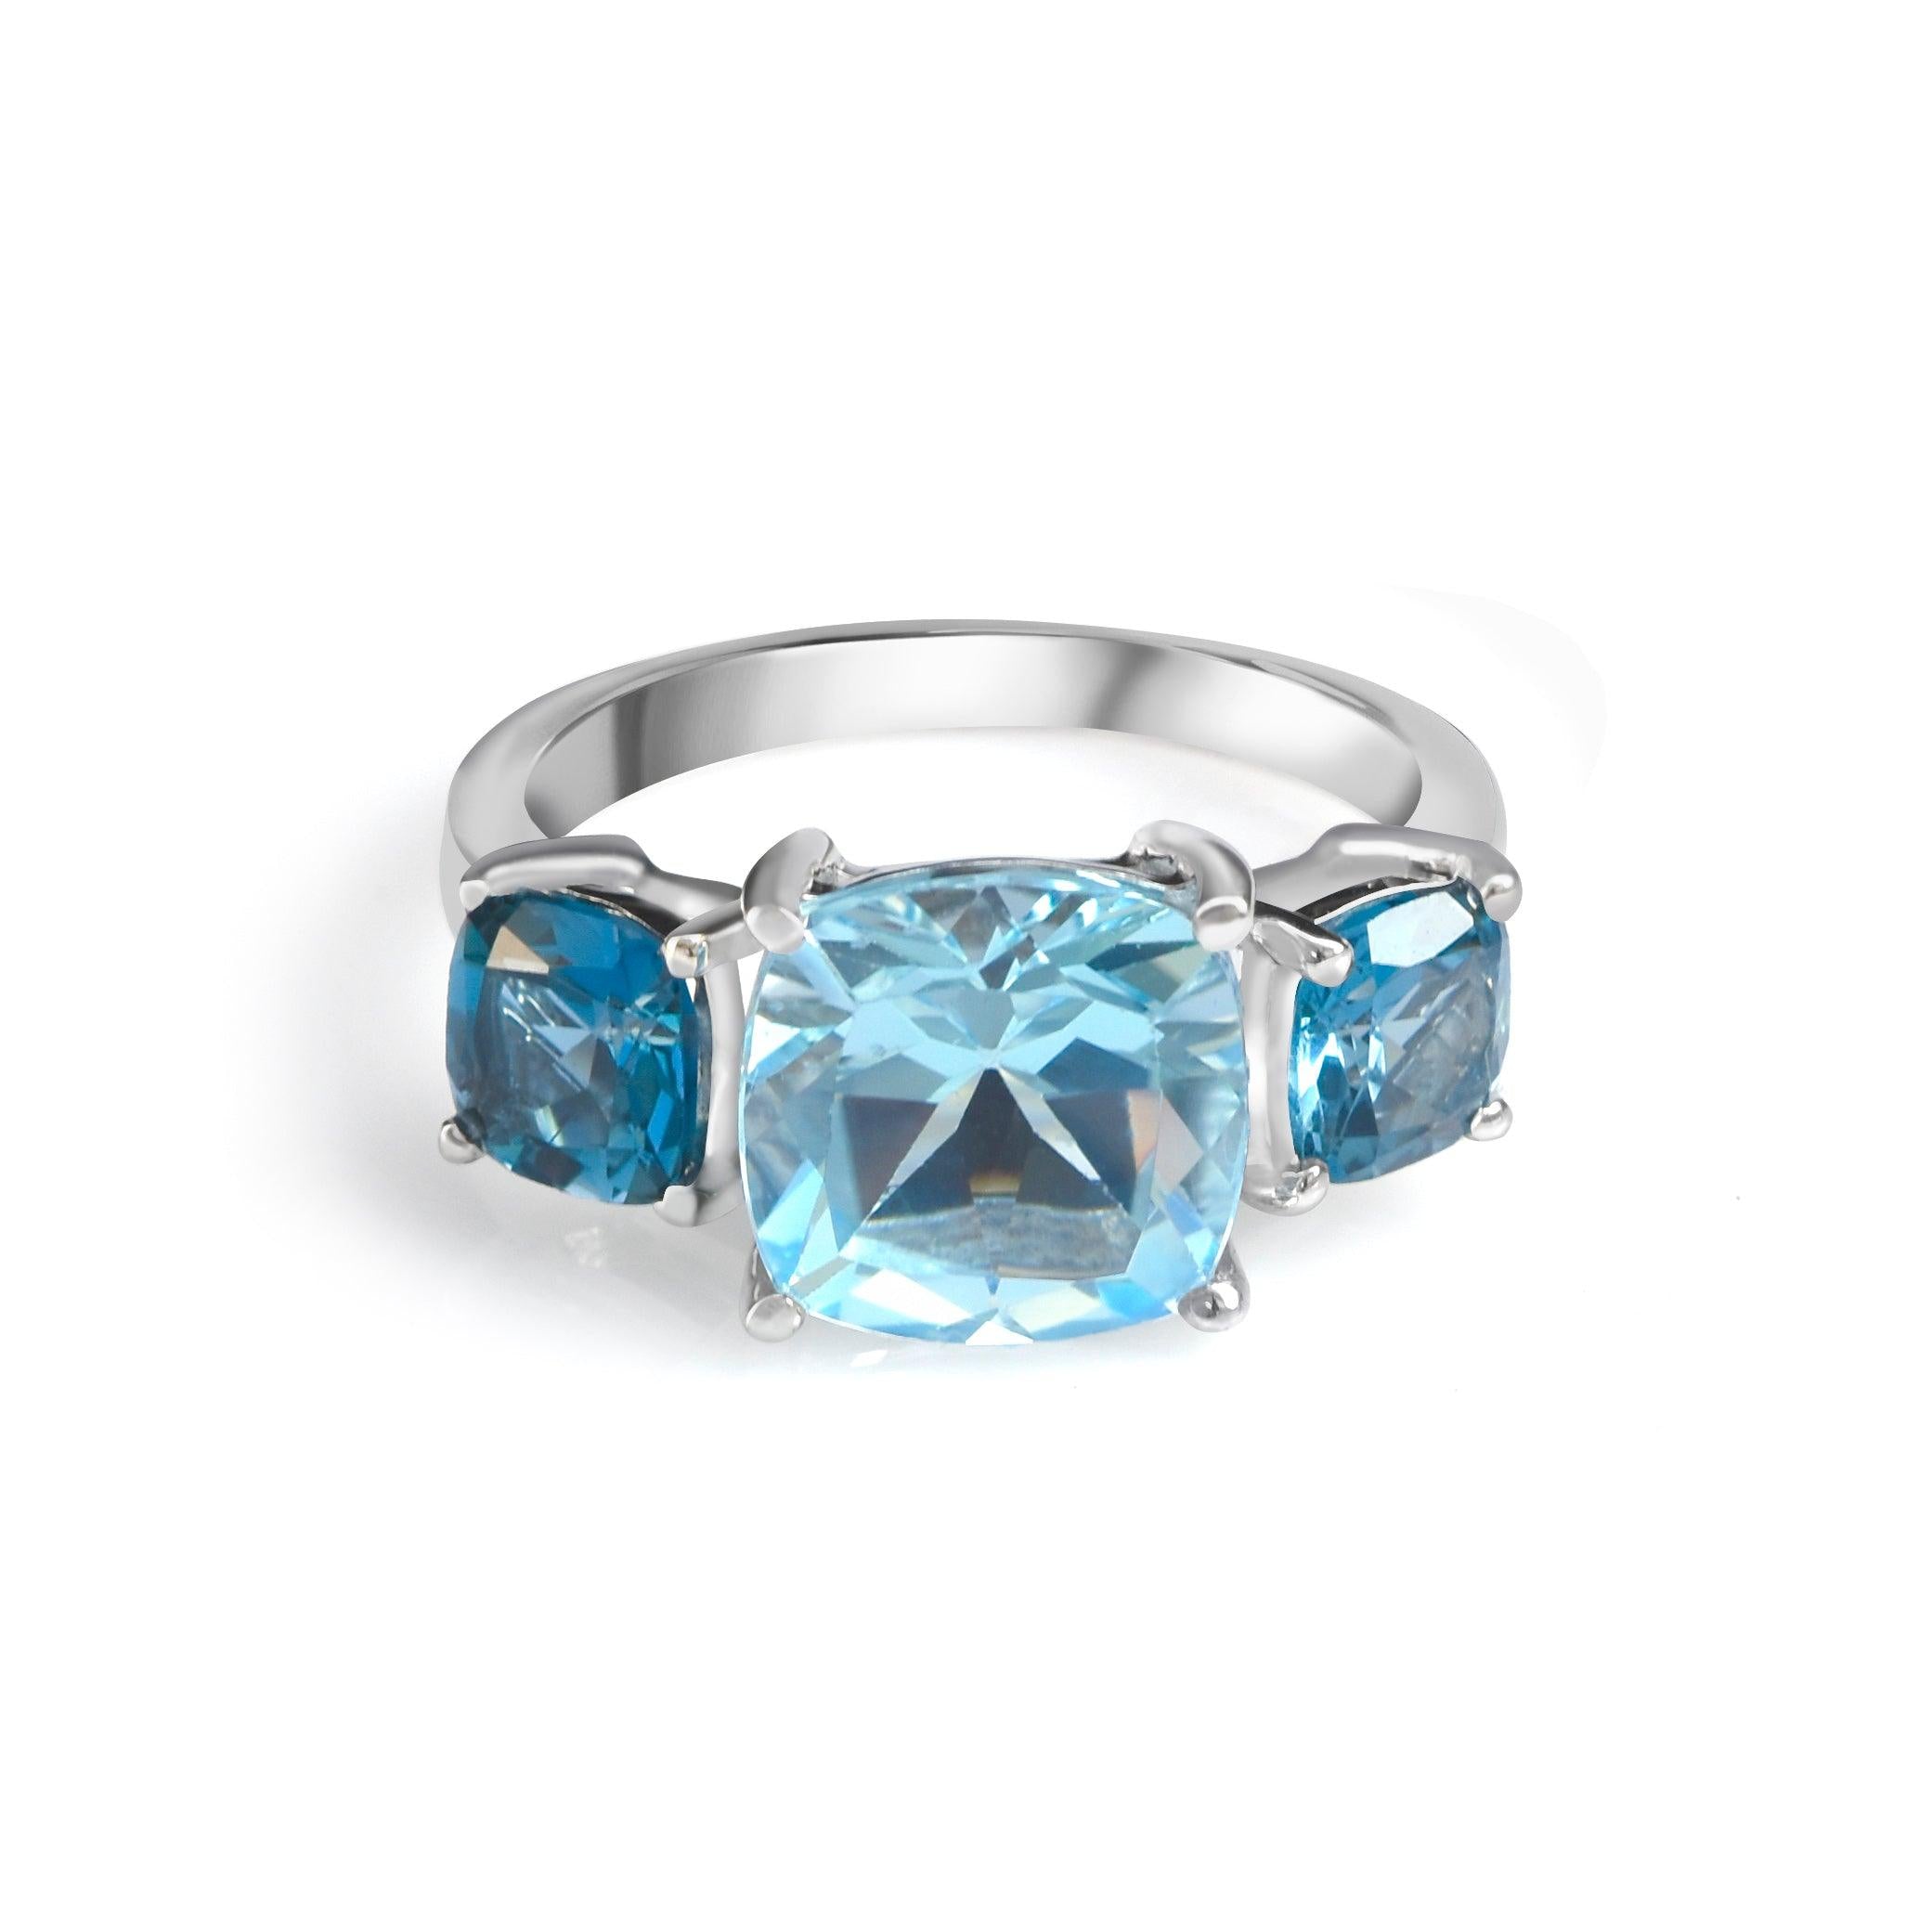 6.77 Ct. Sky Blue Topaz & London Topaz Solid 925 Sterling Silver Engagement Ring Jewelry - YoTreasure